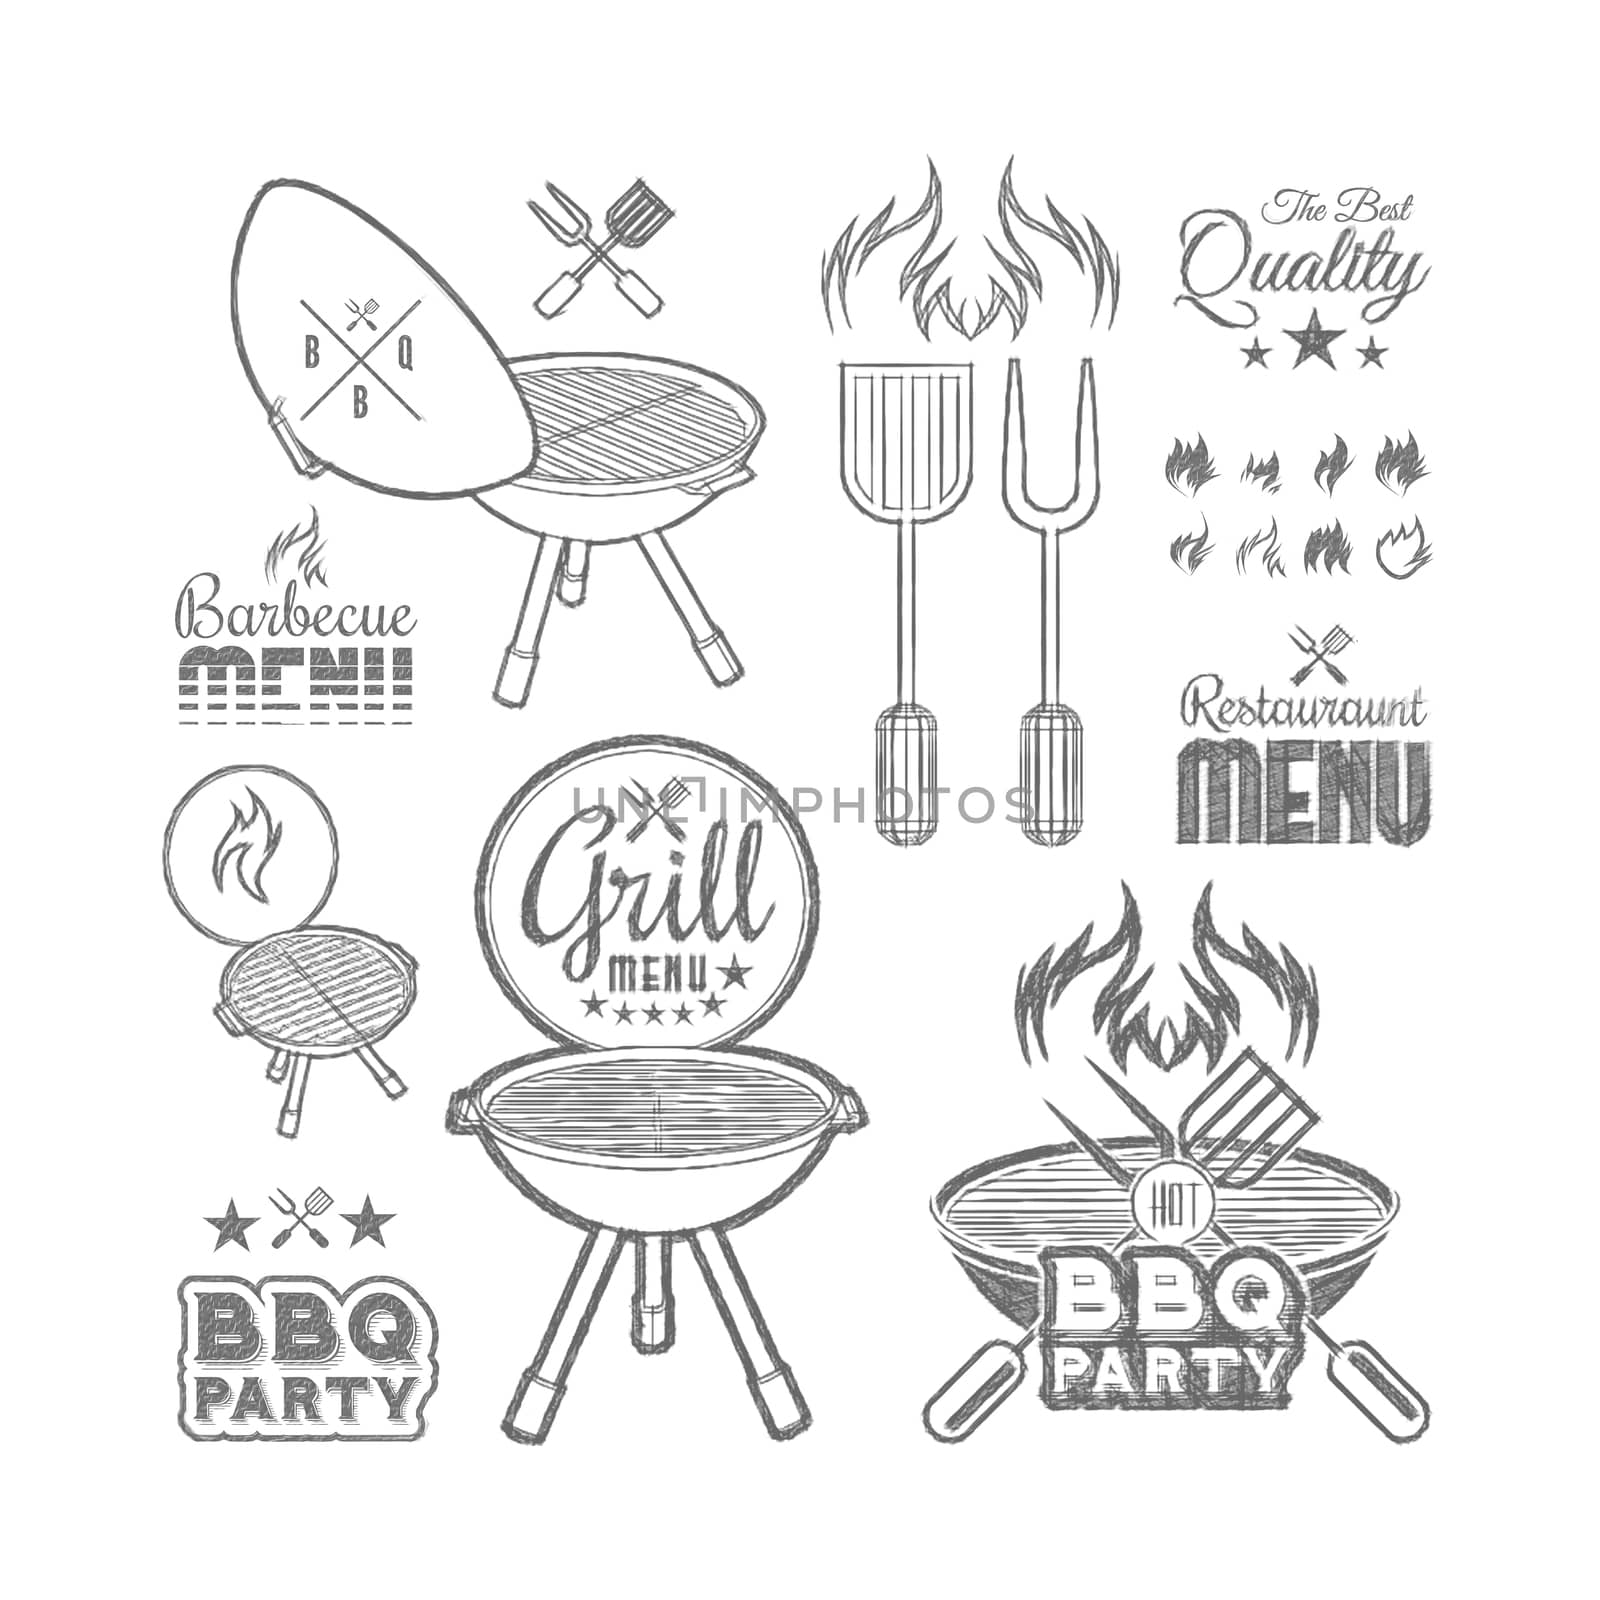 Barbecue grill drawn illustration on white background